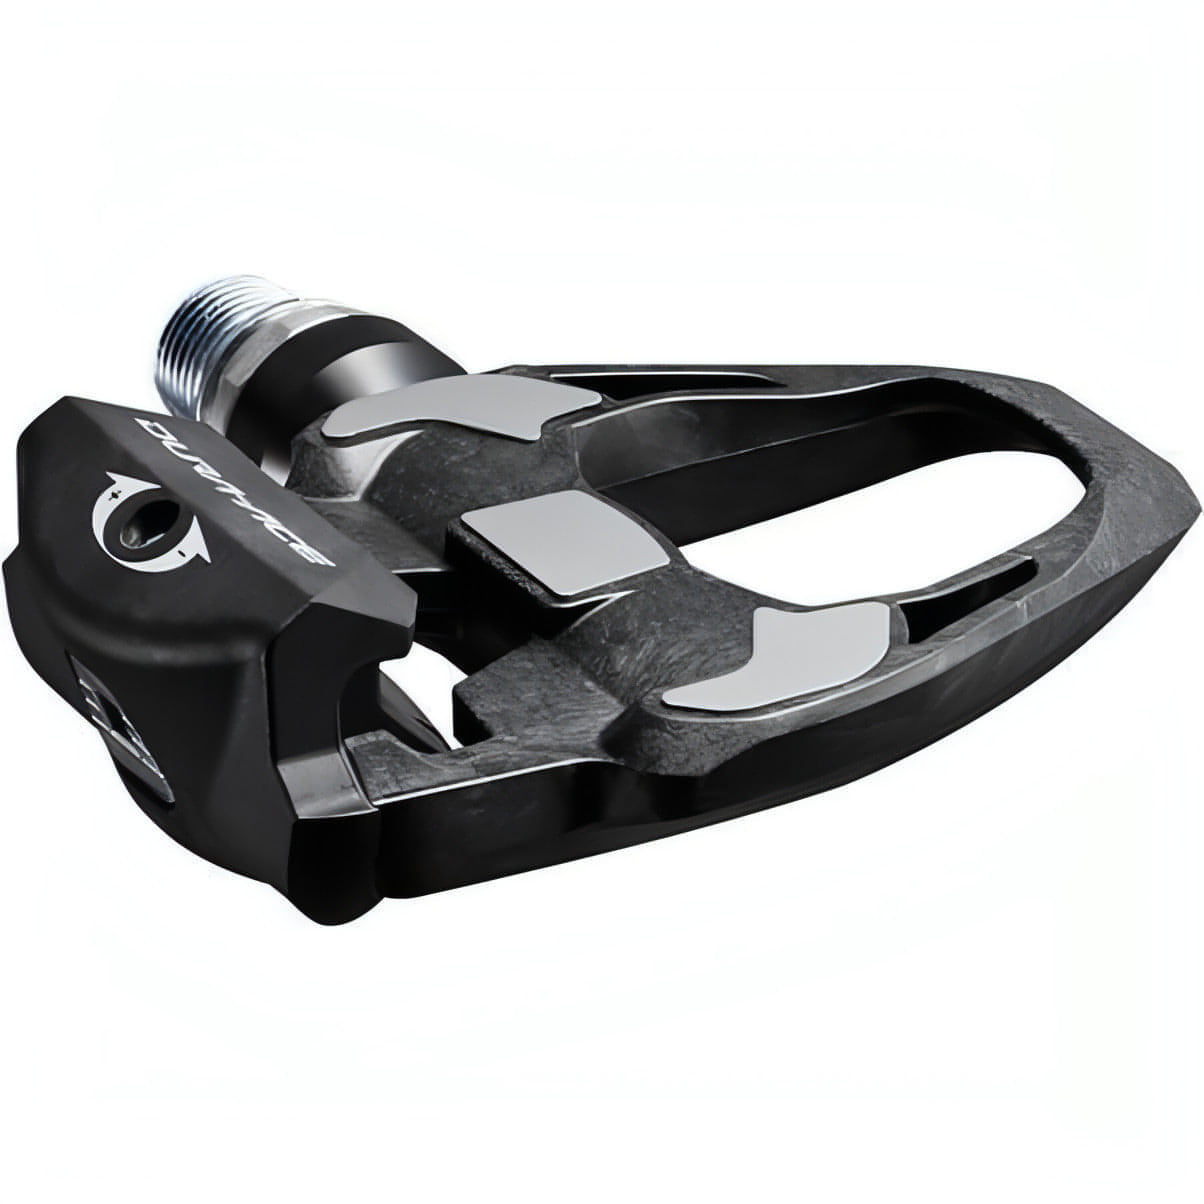 Shimano Dura Ace 9100 Carbon SPD-SL Road Pedals - Black 4524667741800 - Start Fitness